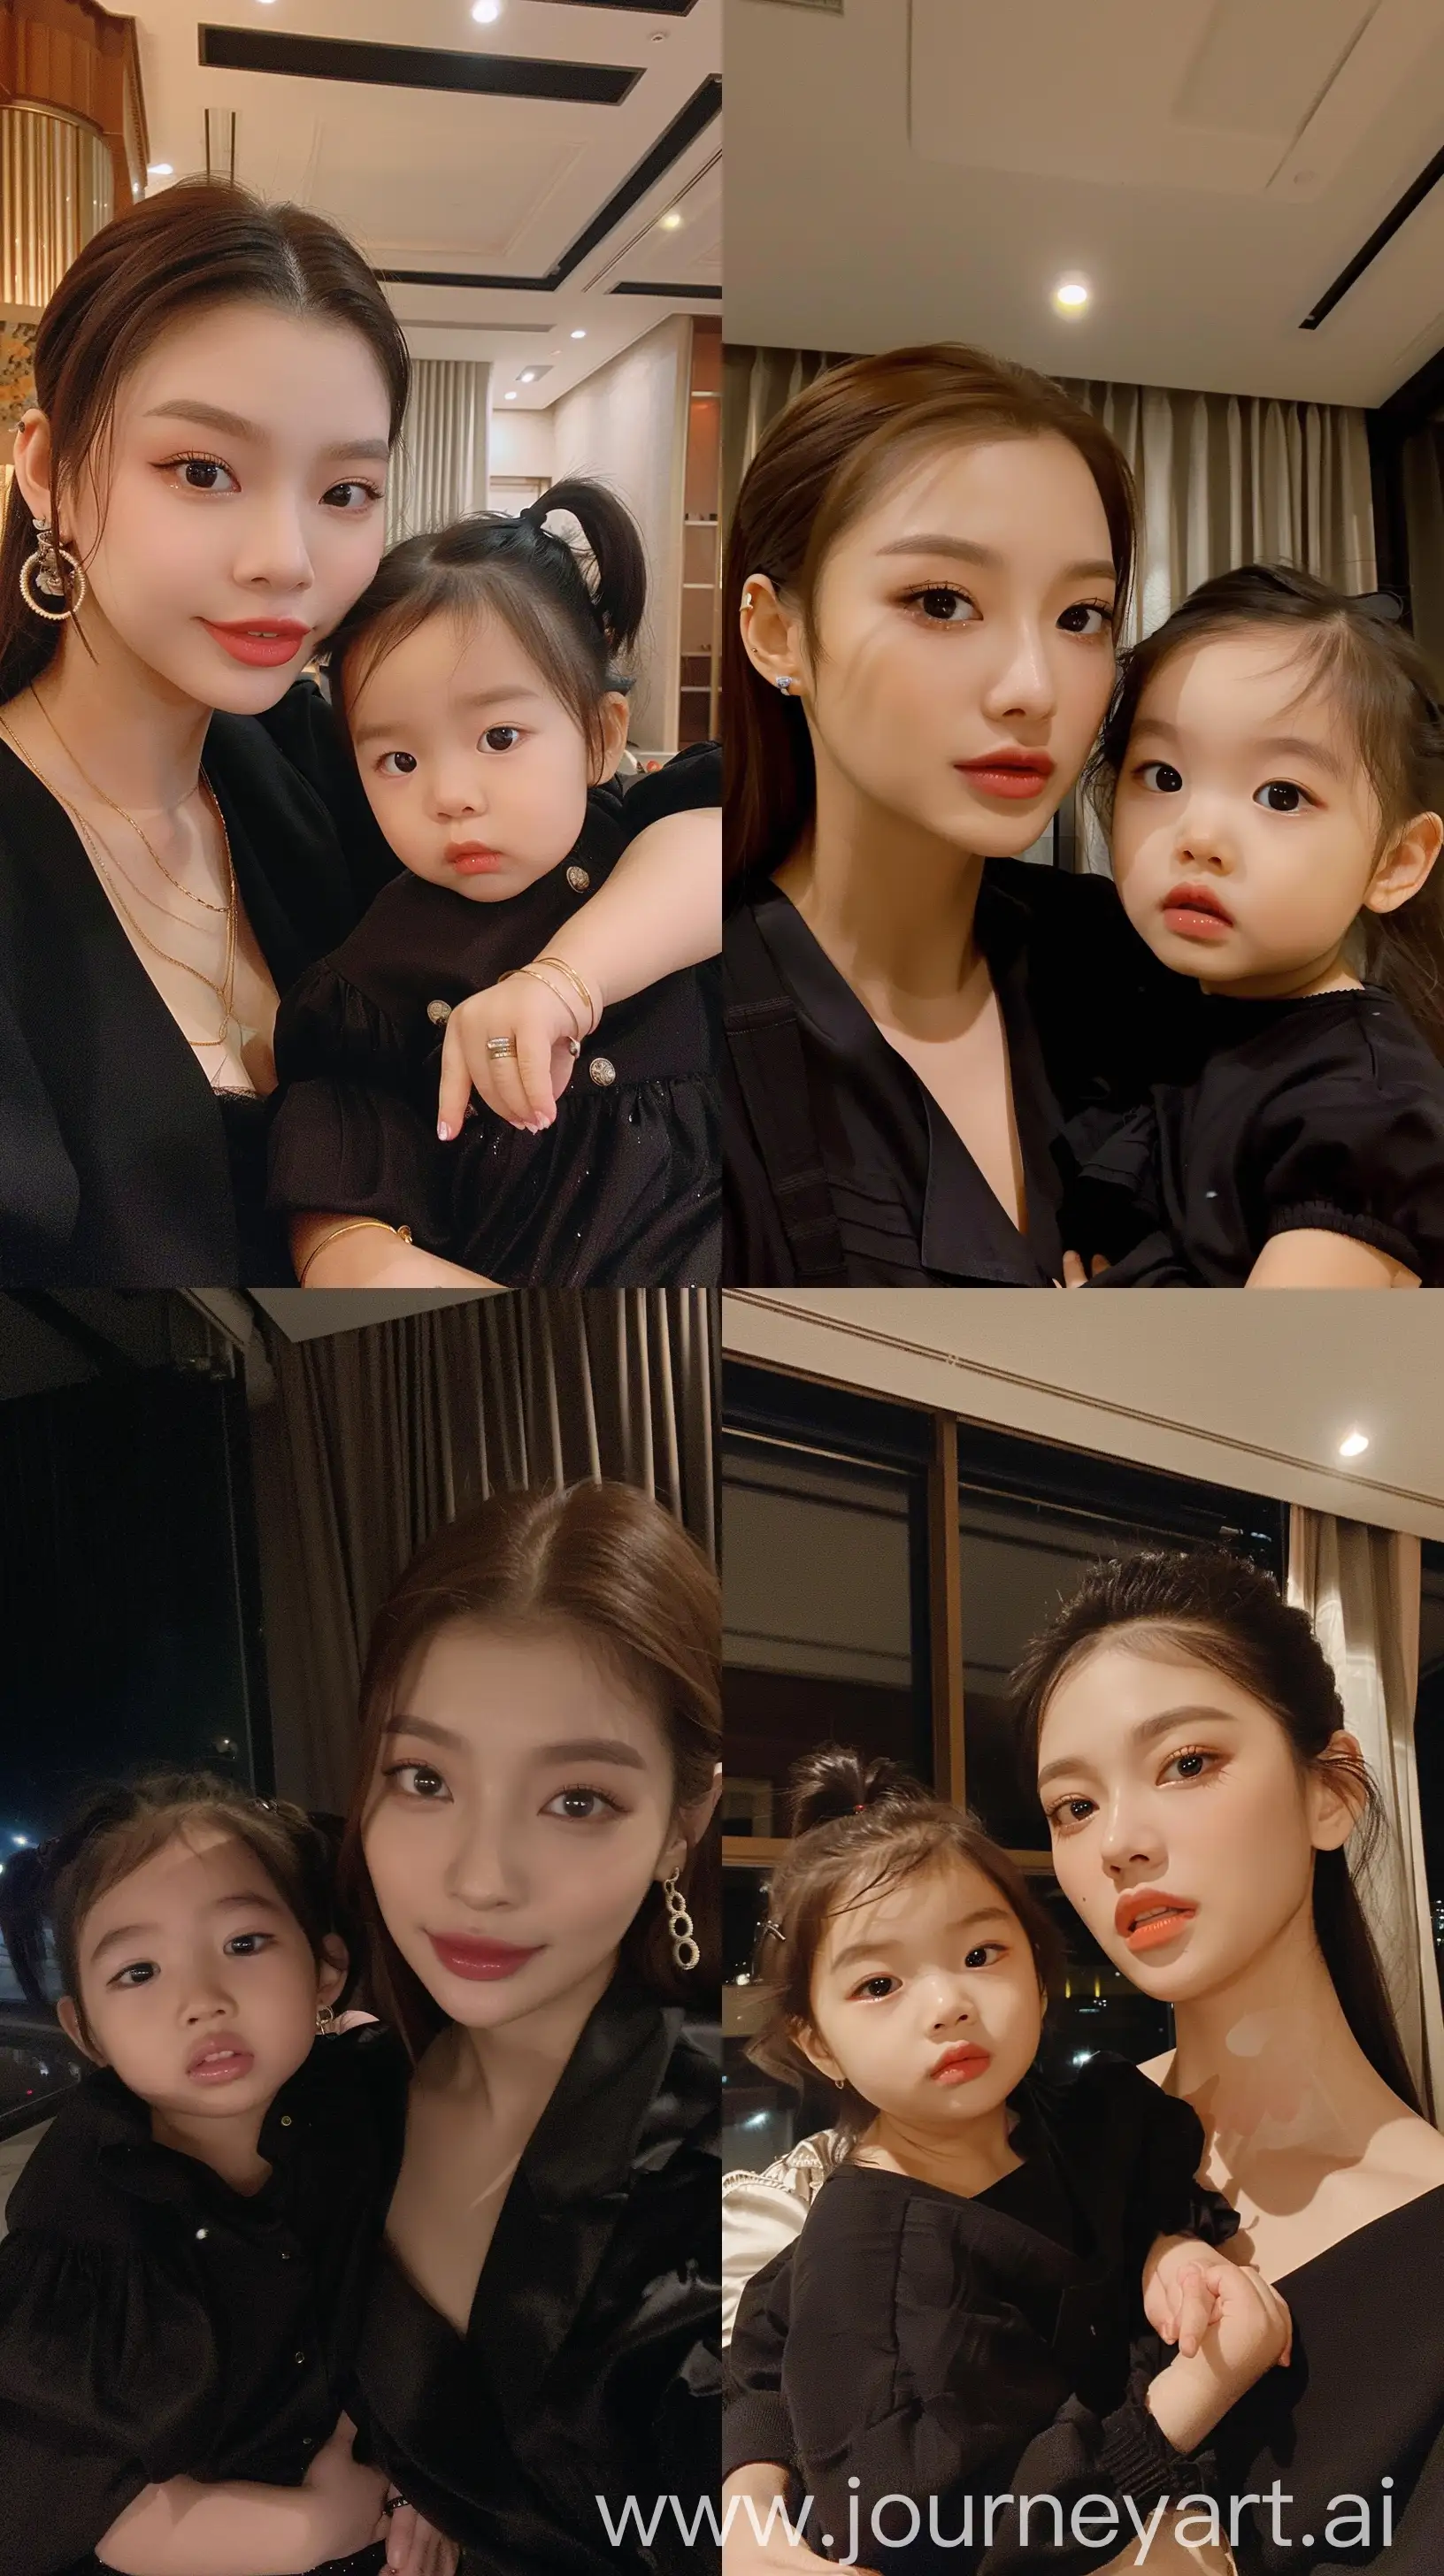 Blackpink-Jennie-Lookalike-Selfie-with-Young-Daughter-at-Night